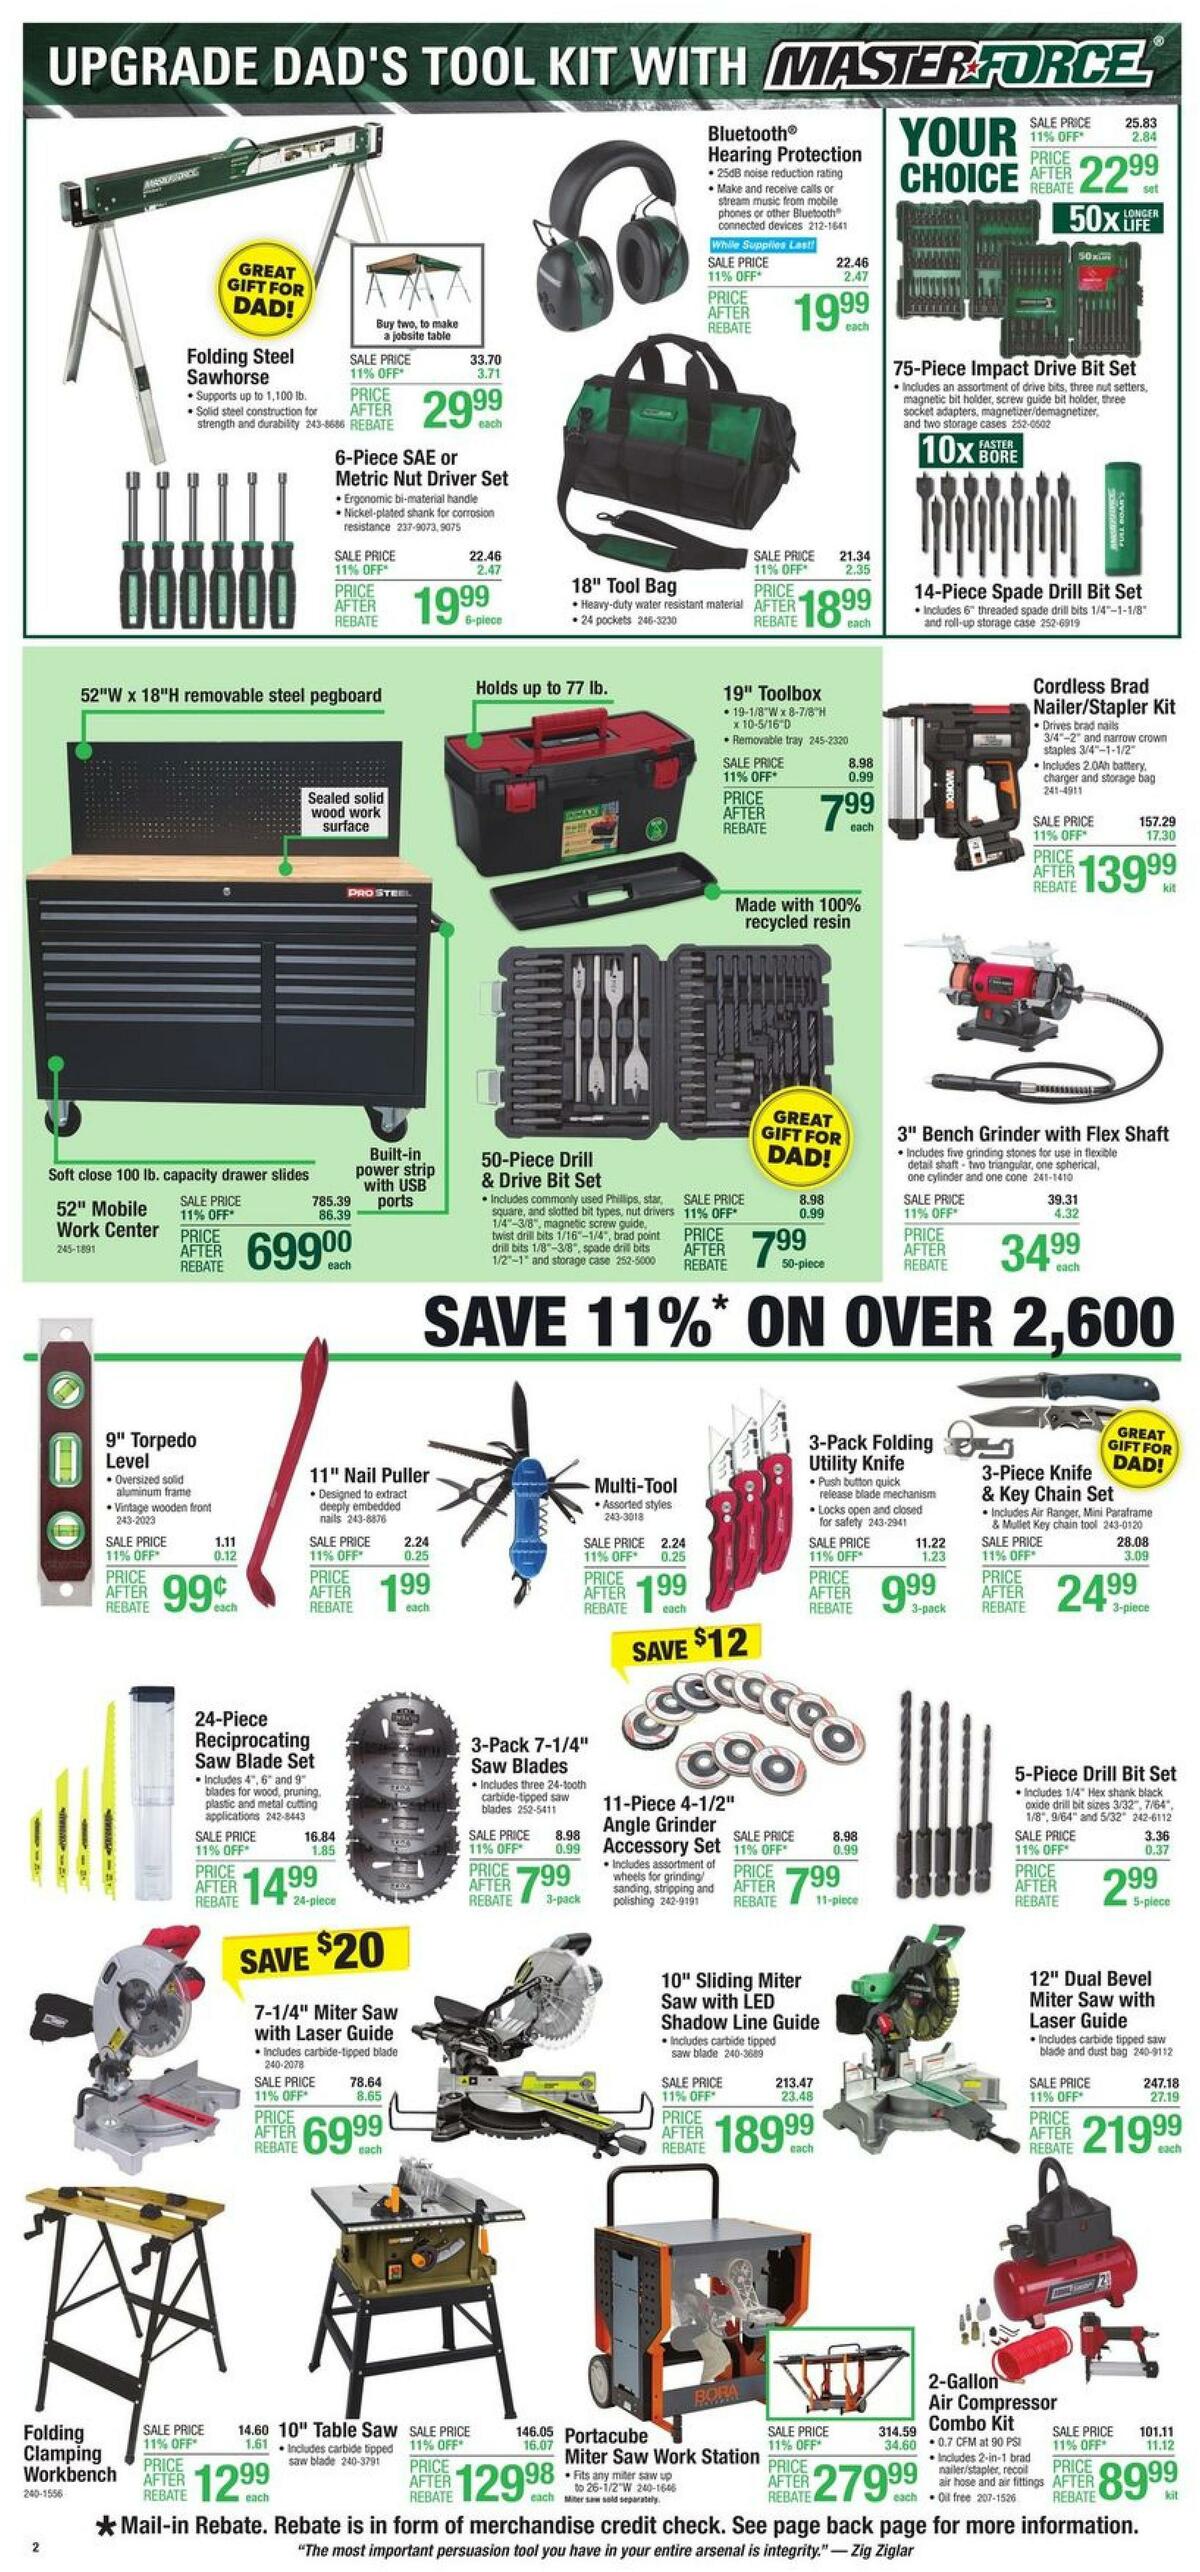 Menards 11% OFF TOOLS FOR DAD Weekly Ad from June 8